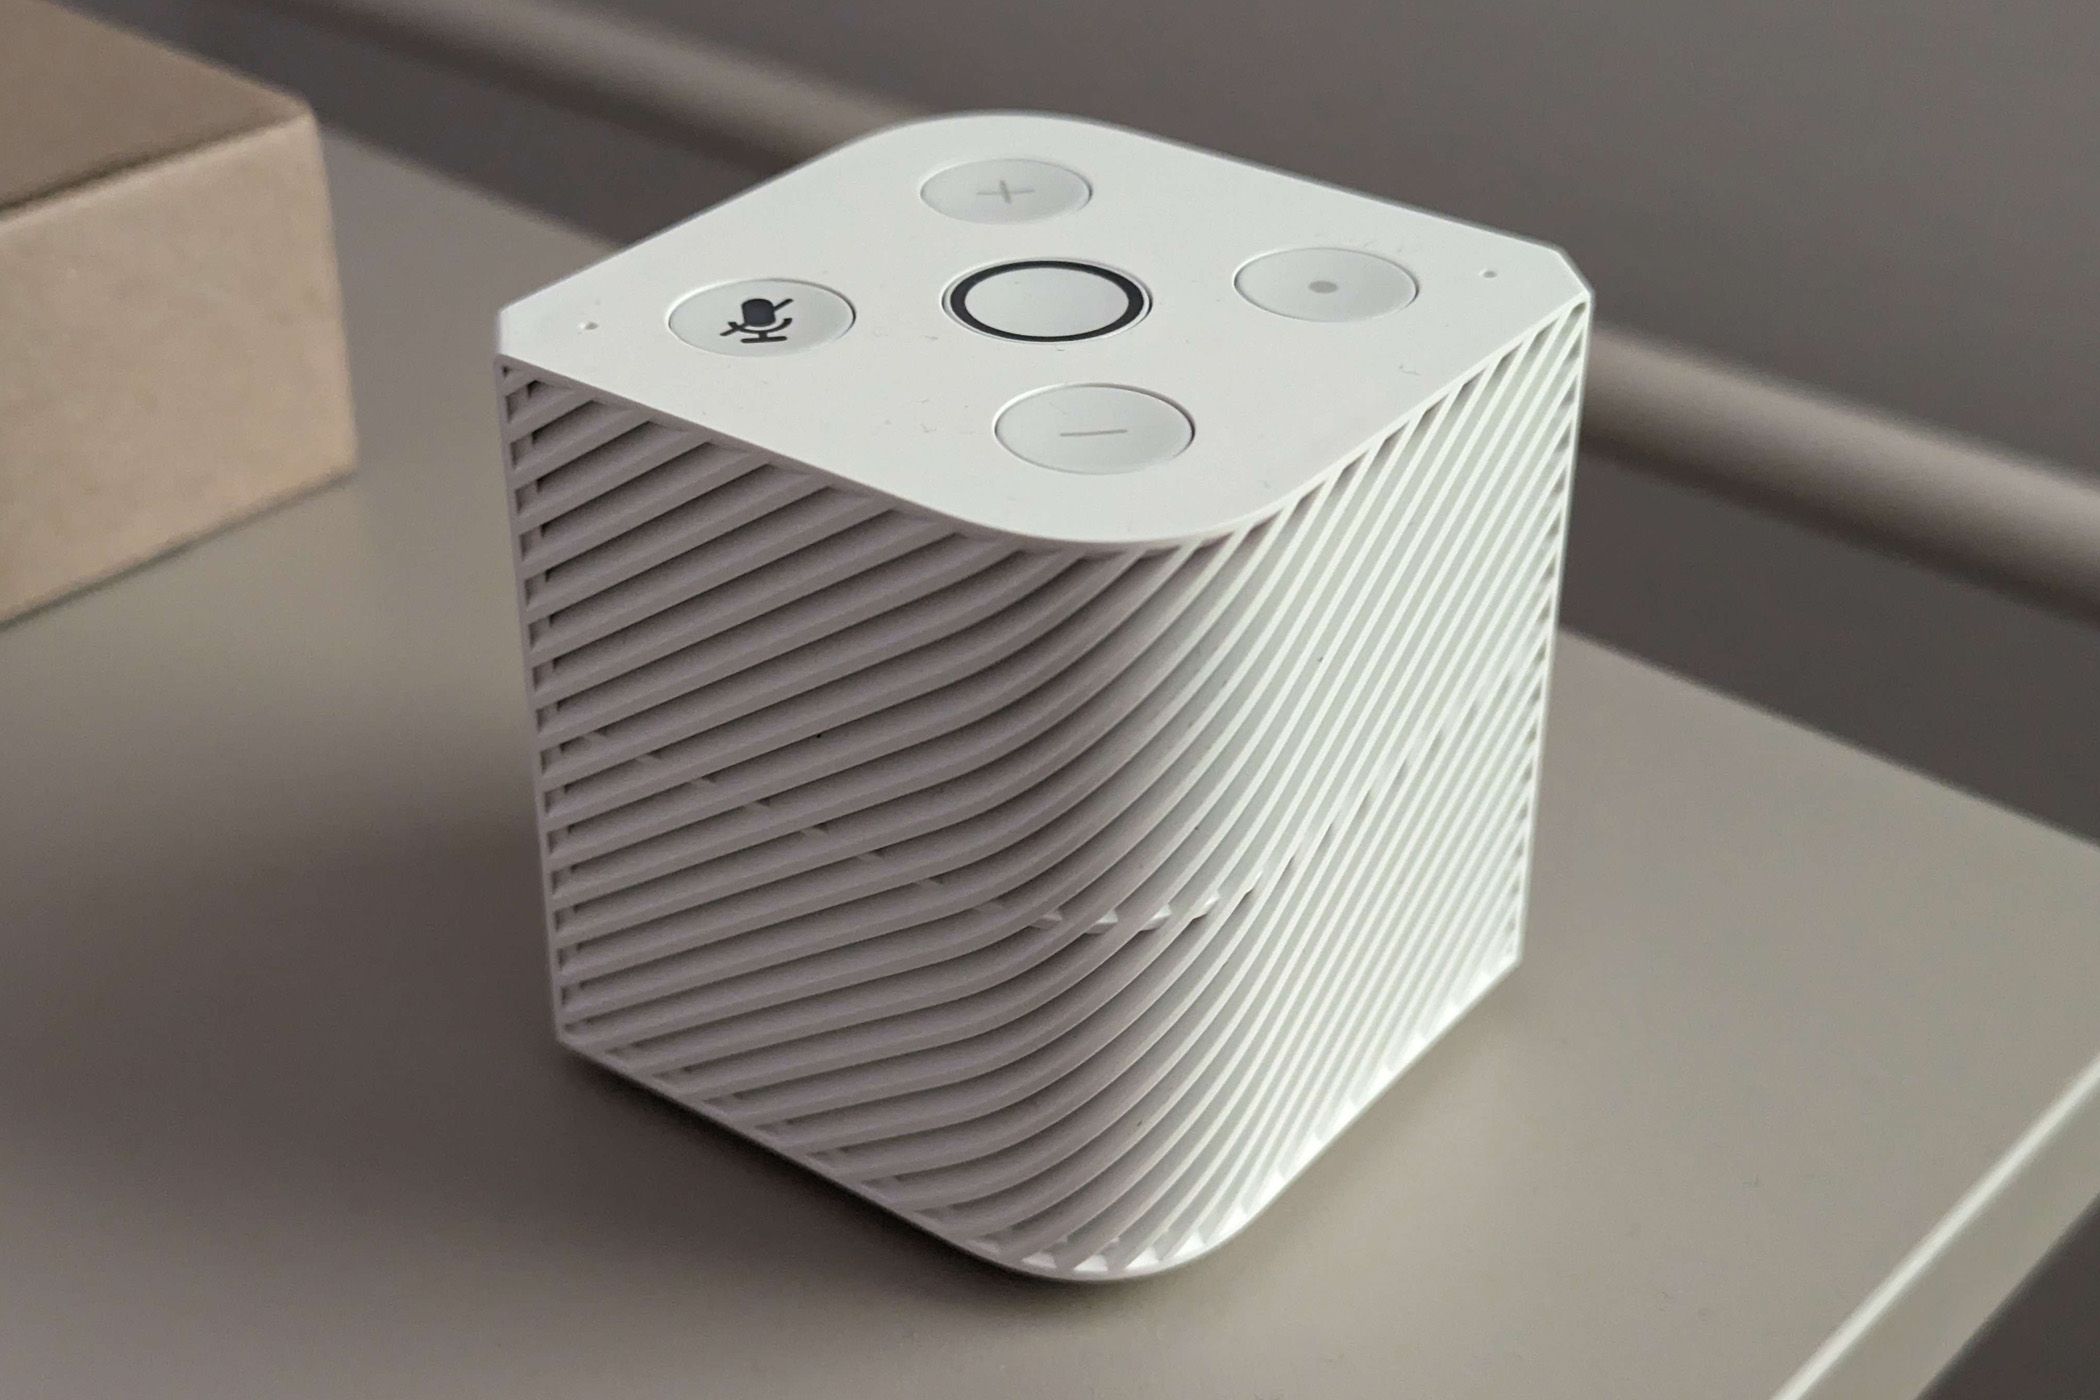 White cubic smart speaker with buttons on top, placed on a table.